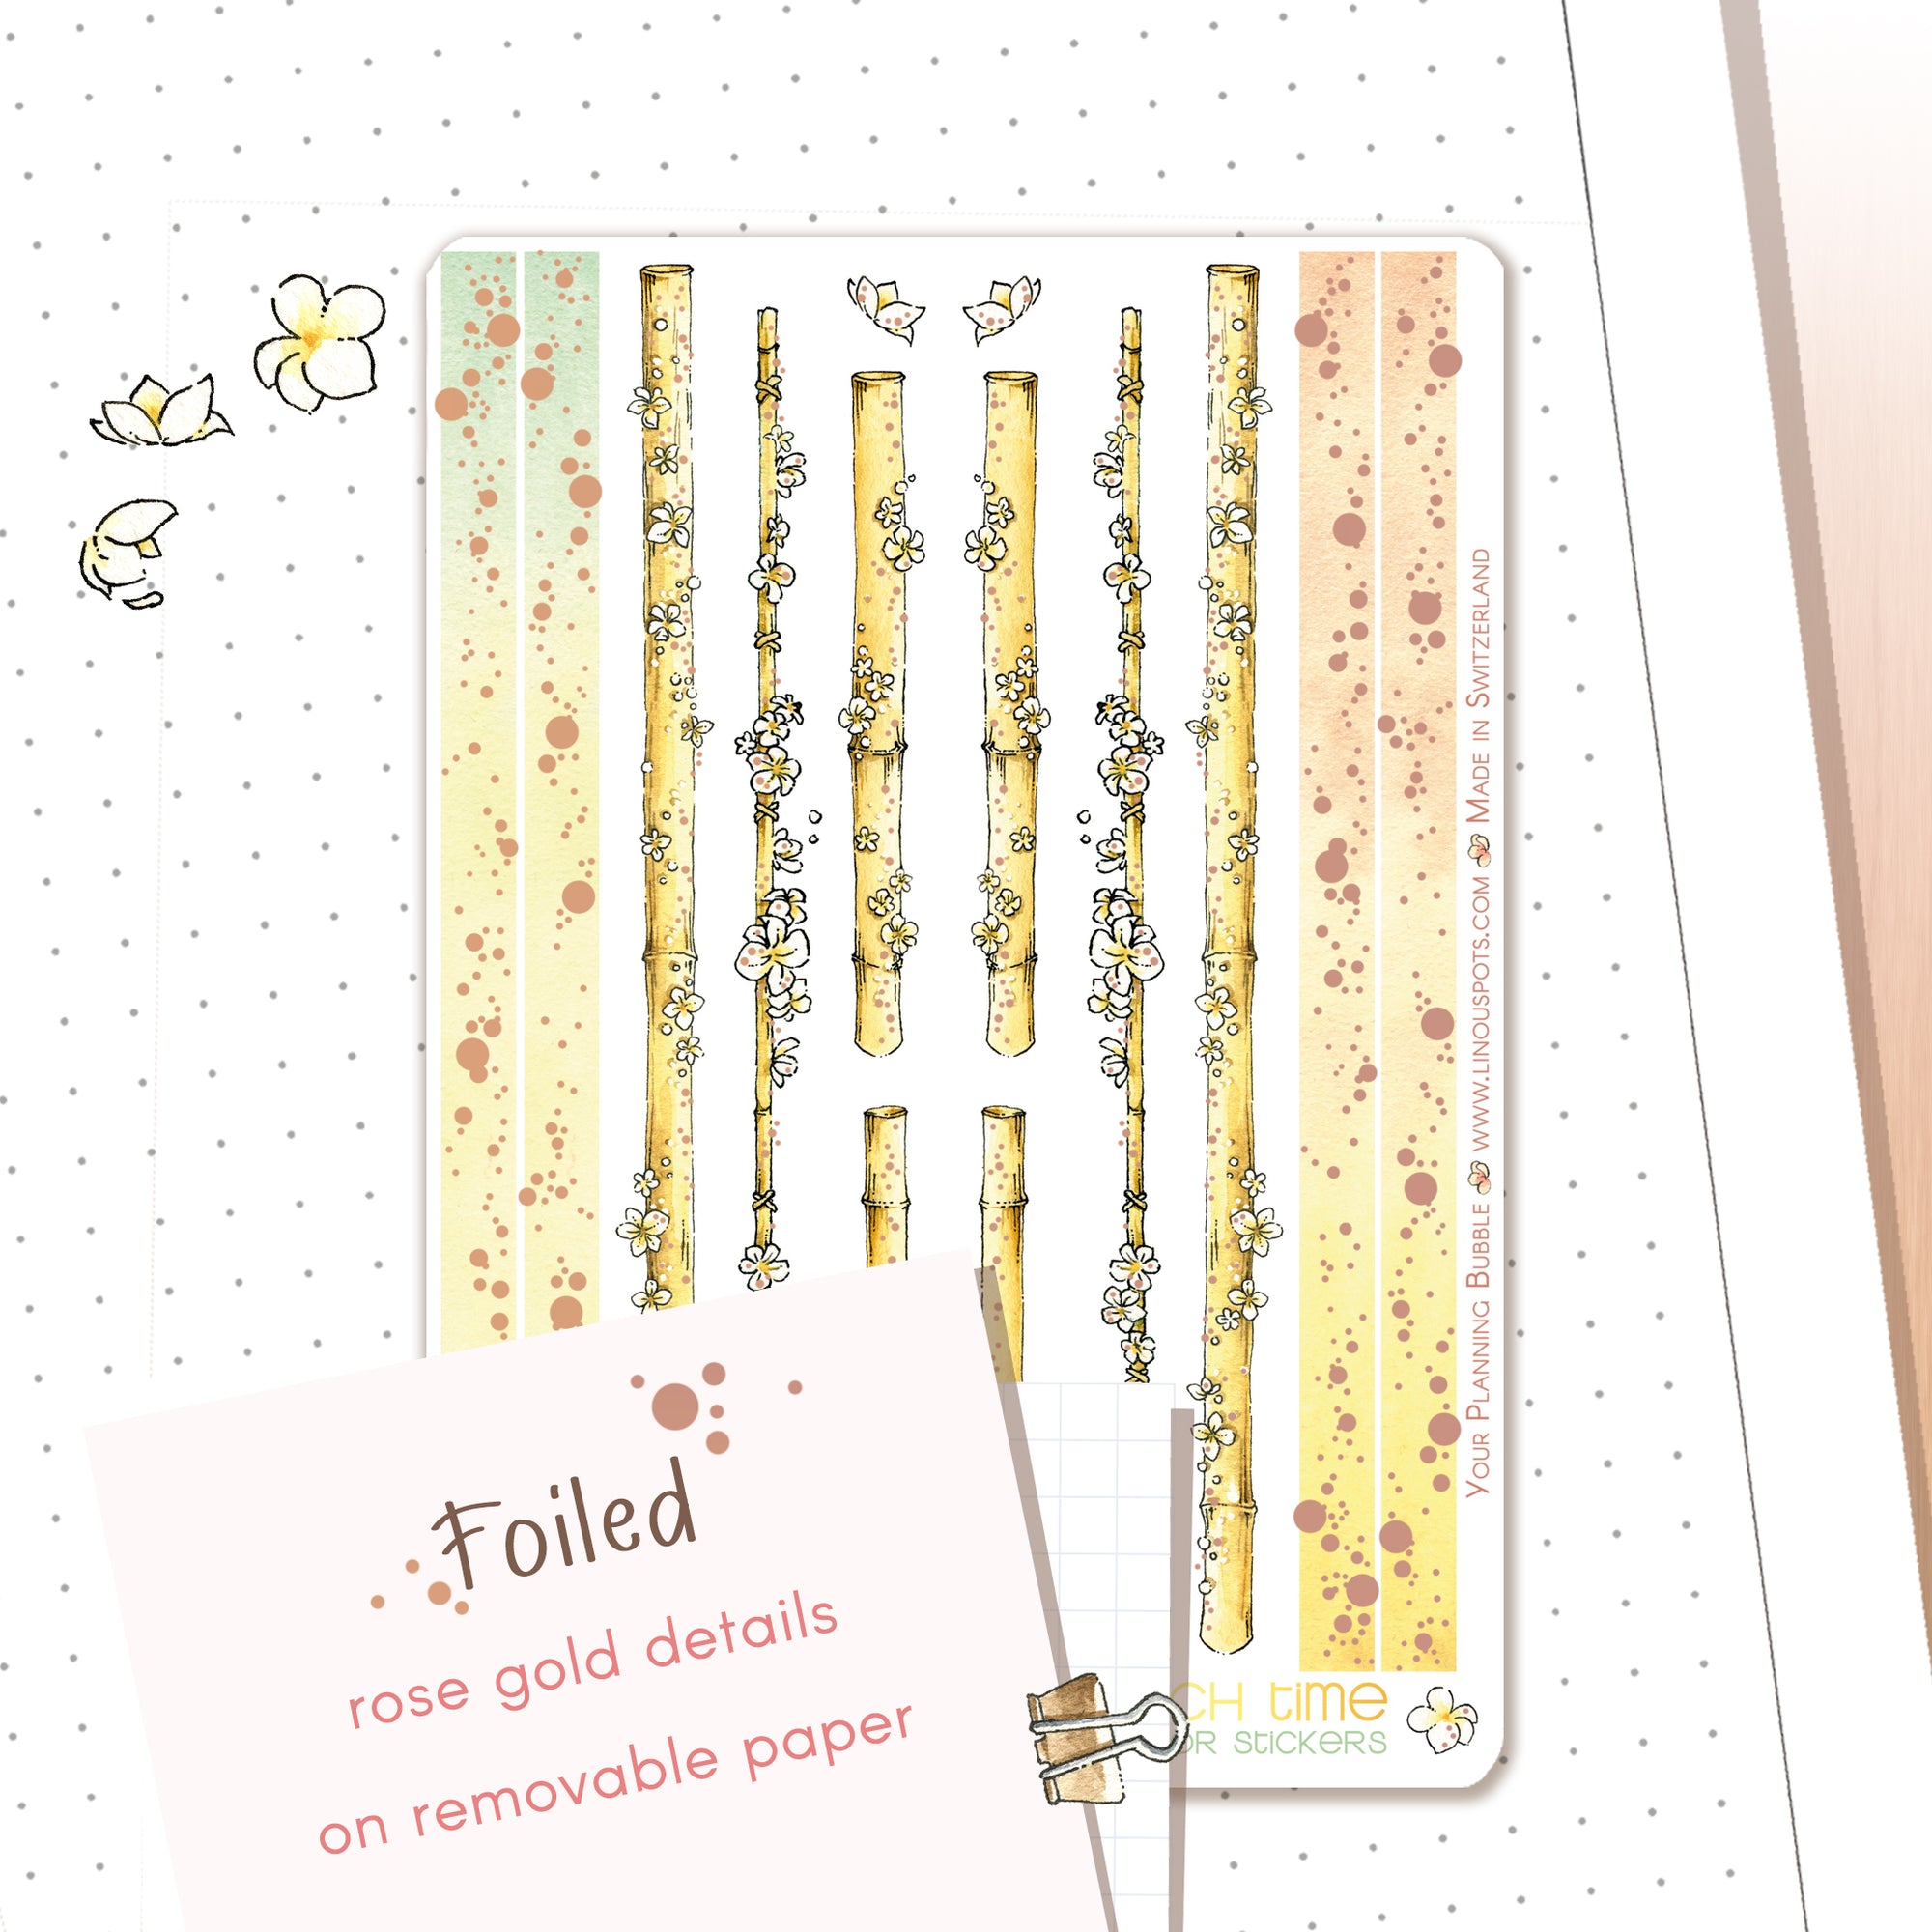 Watercolour wahis stickers sheet with foiled